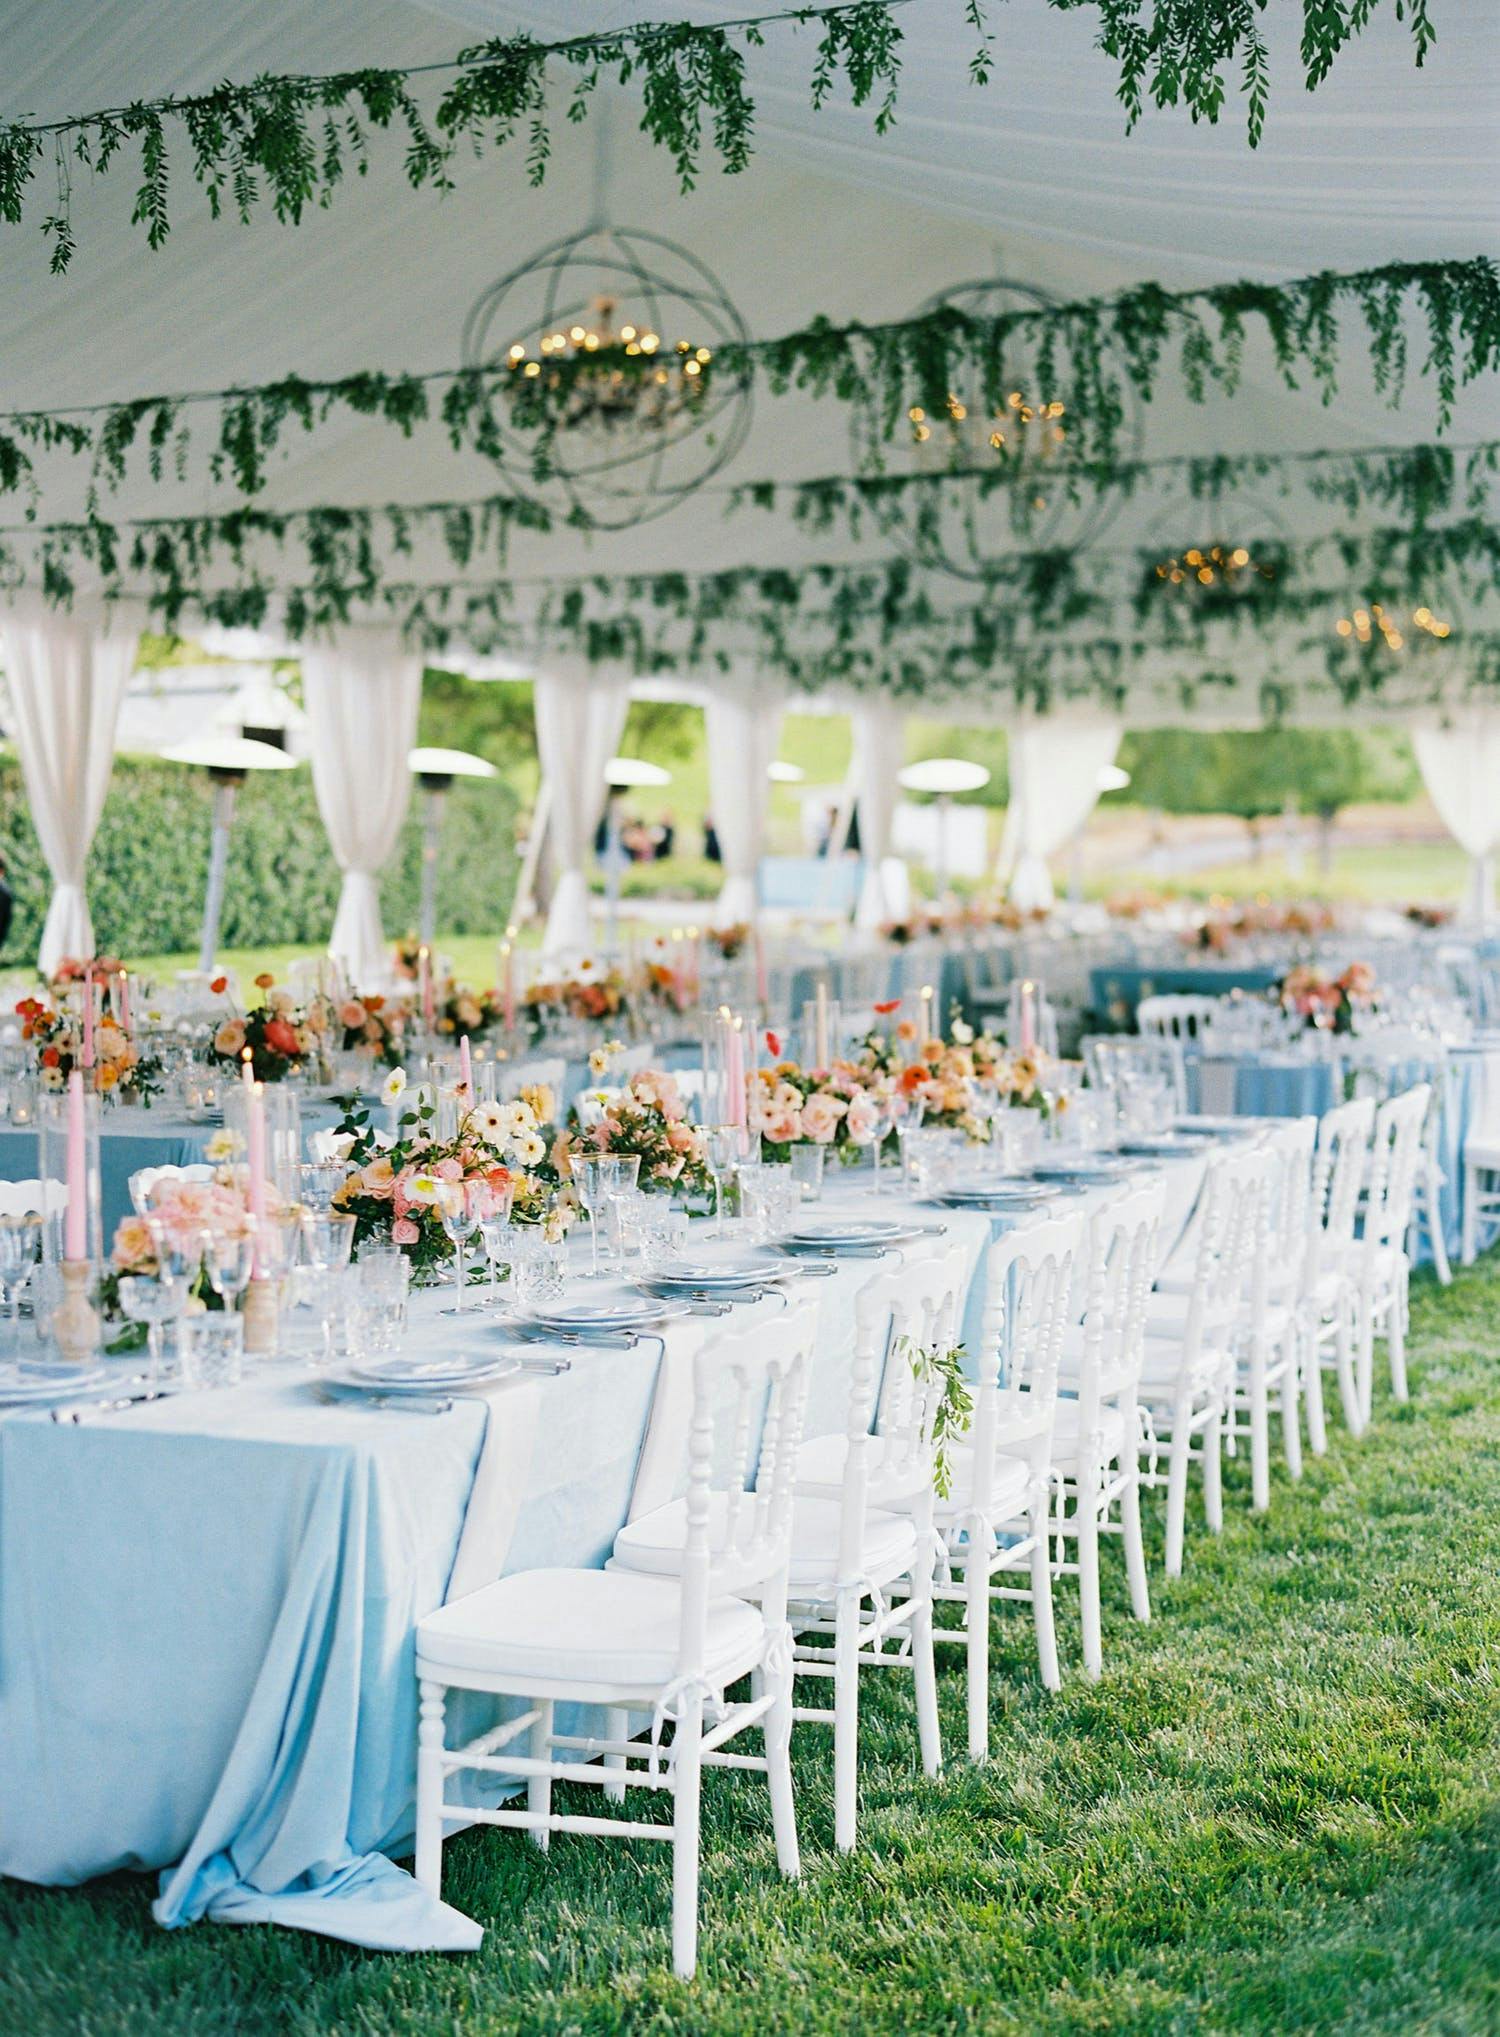 Whimsical Tent Wedding With Blue Linen and Colorful Flowers | PartySlate